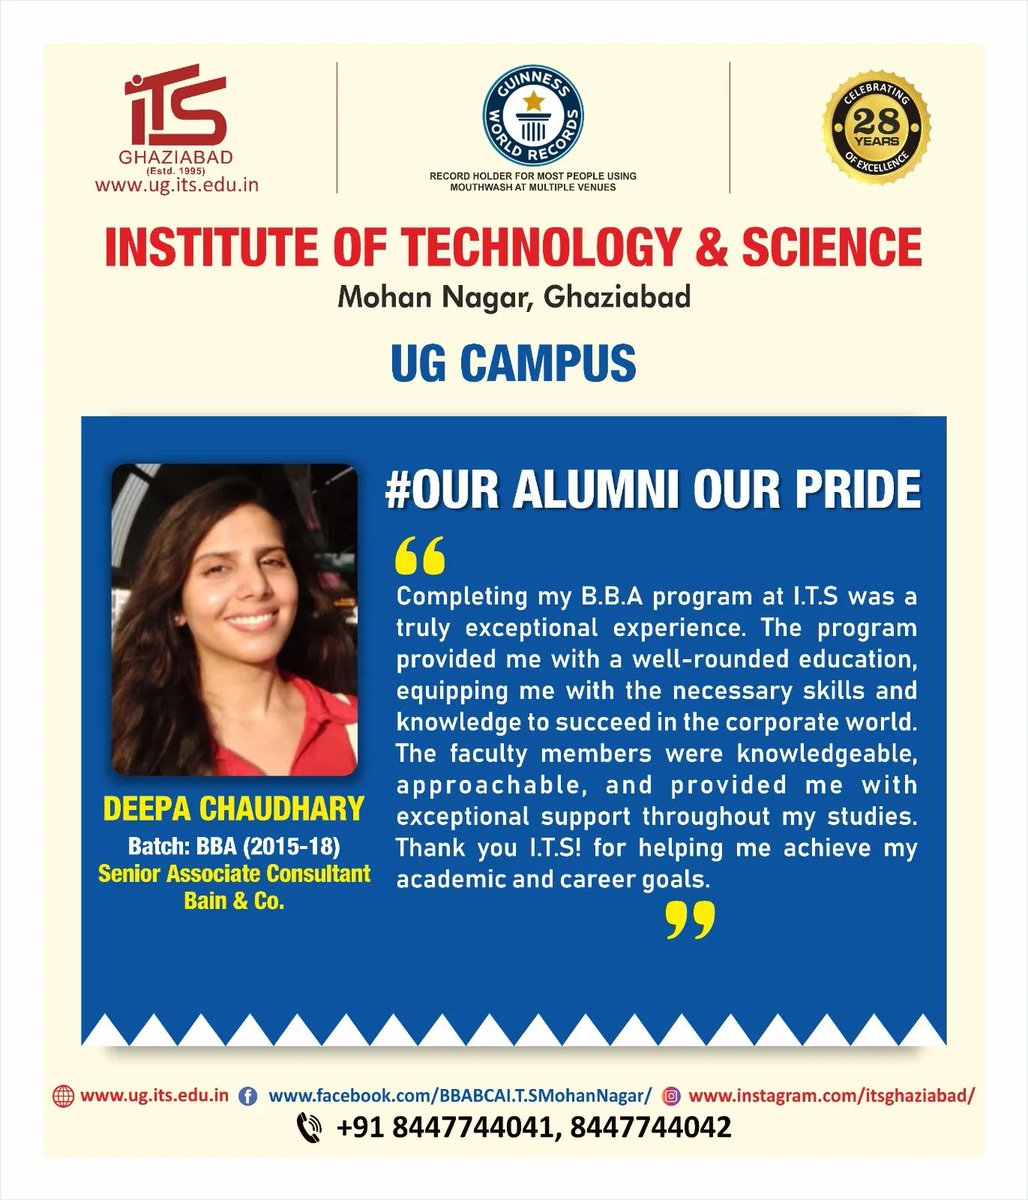 #ouralumniourpride
Deepa Chaudhary, Alumni of BBA Batch 2015-2018 shared her experience about I.T.S Mohan Nagar Ghaziabad UG campus.